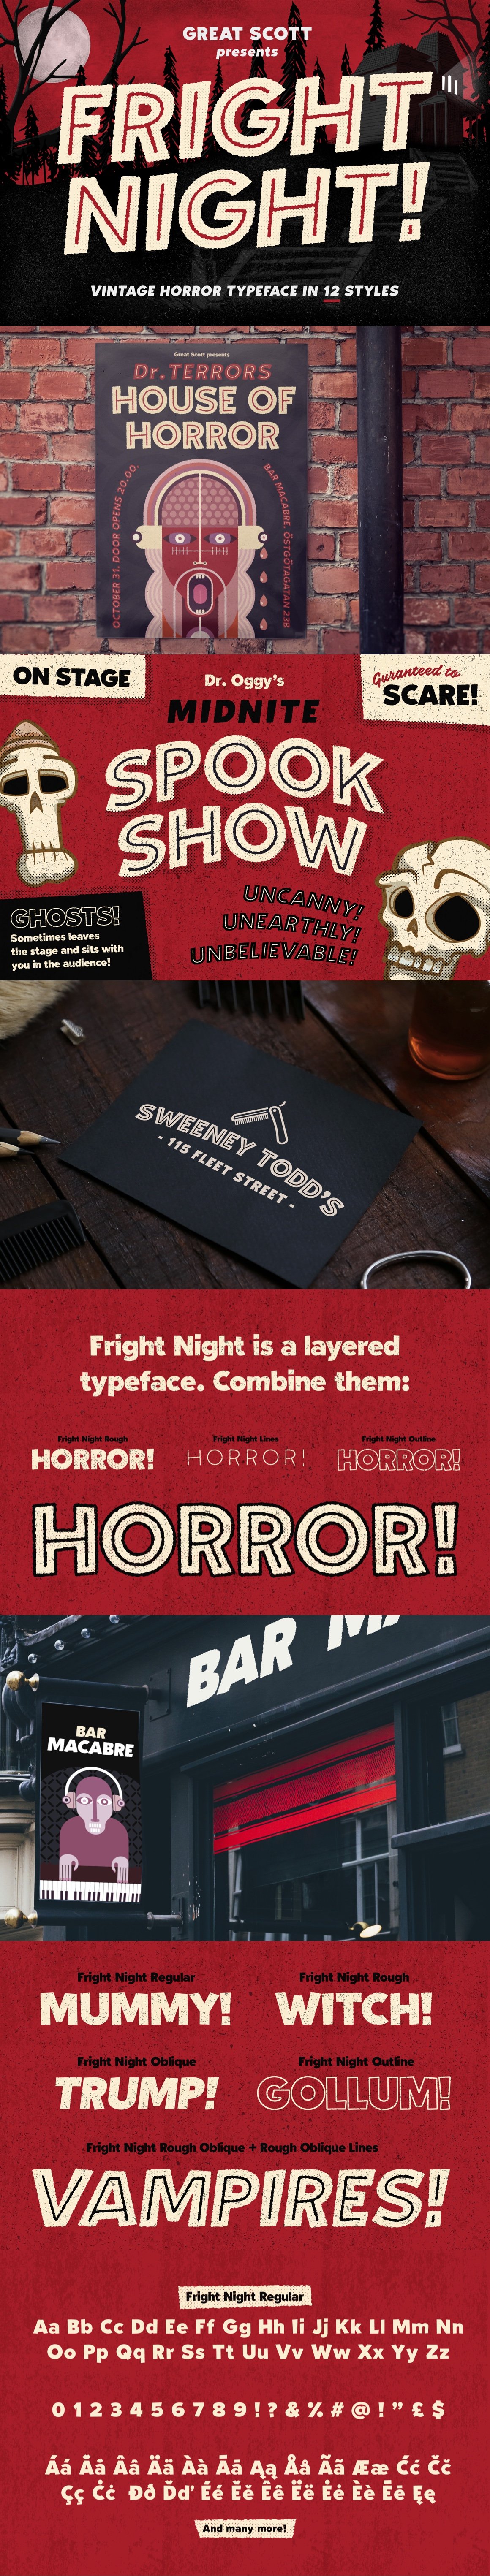 Fright Night! A vintage horror font cover image.